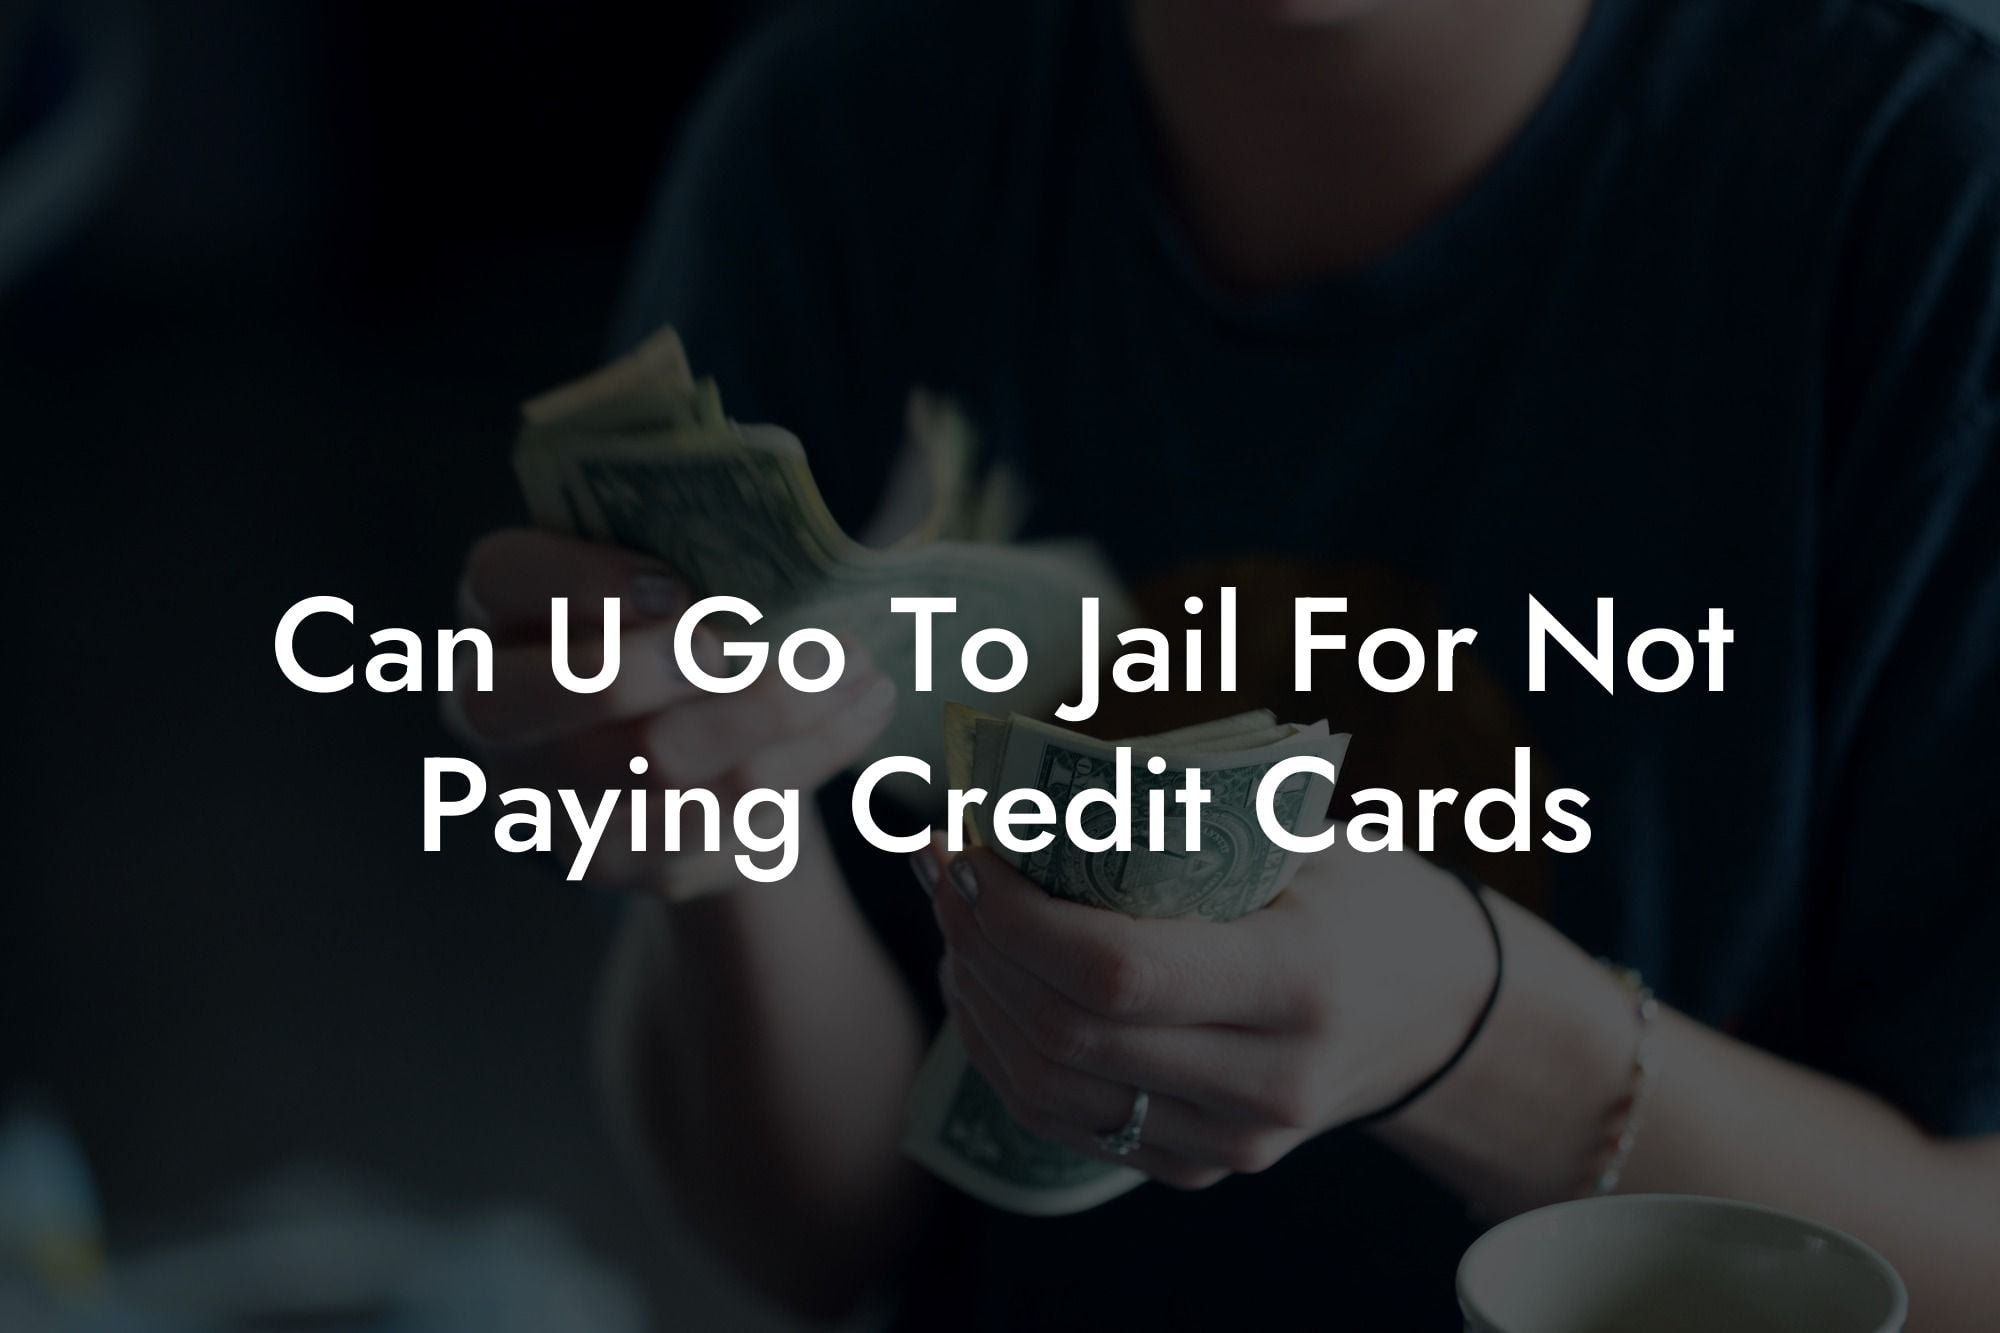 Can U Go To Jail For Not Paying Credit Cards